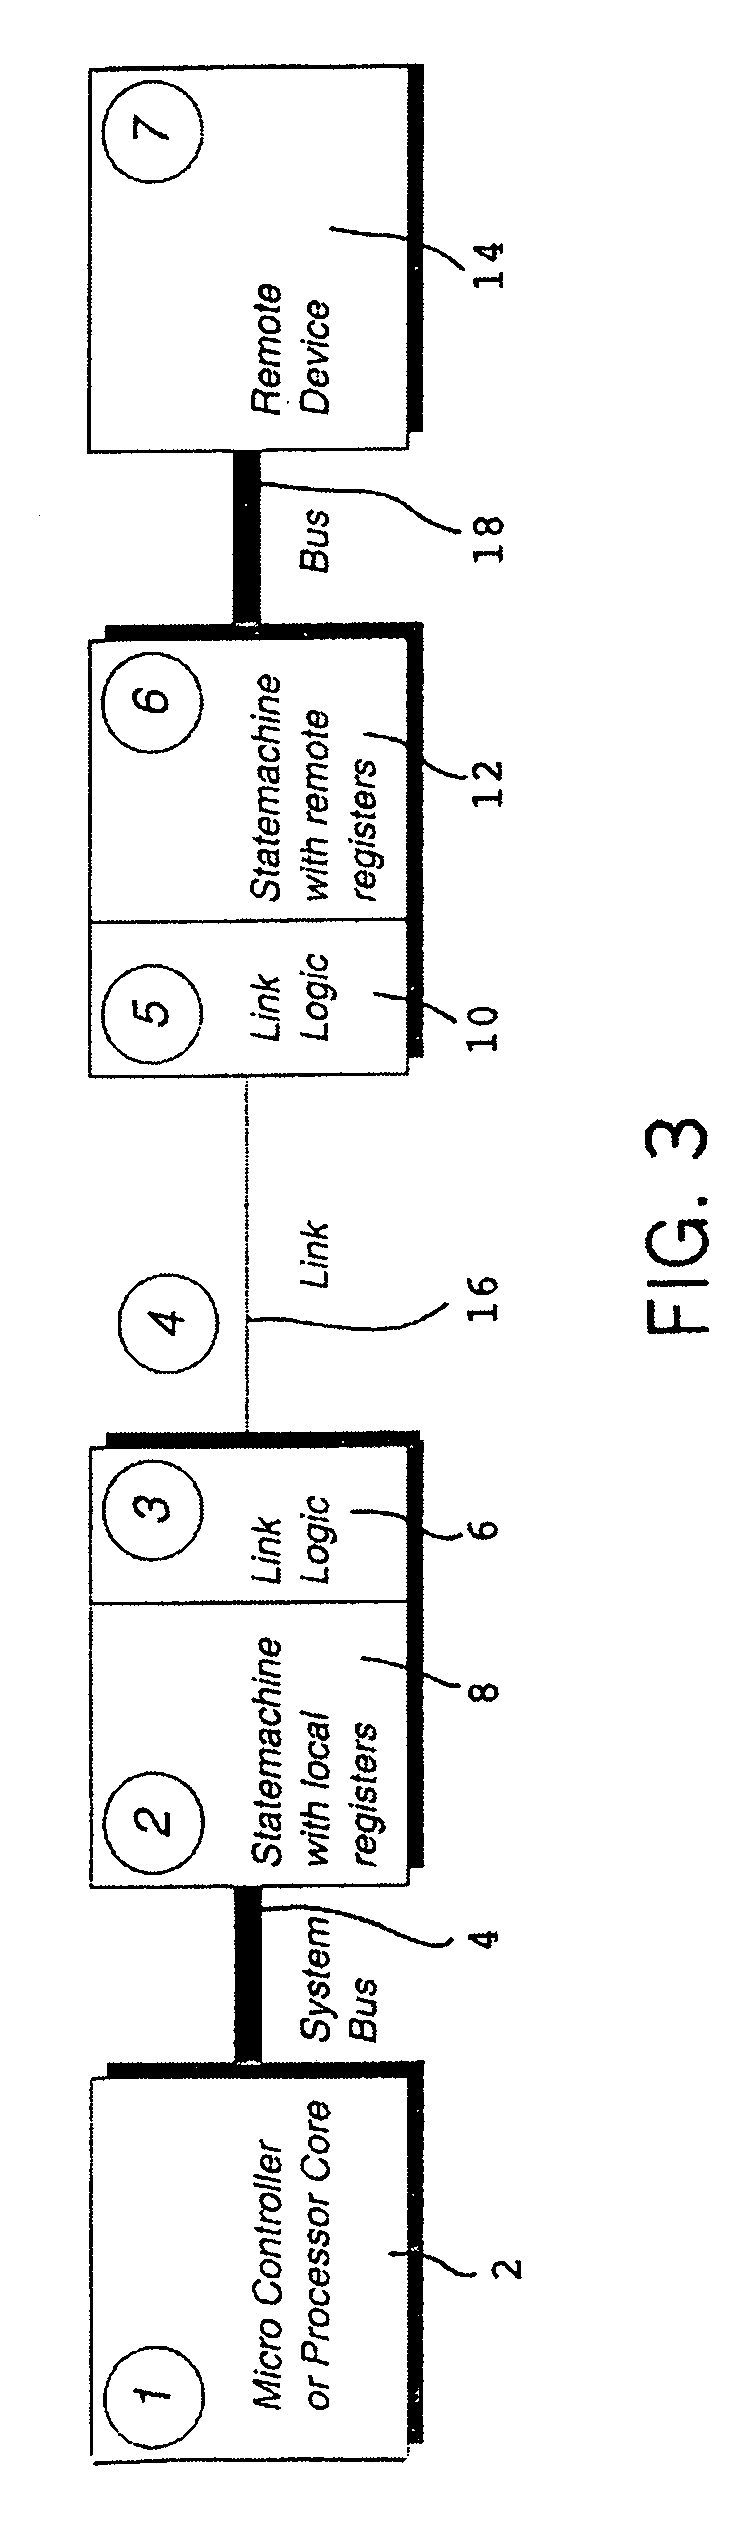 Method and system for efficient access to remote I/O functions in embedded control environments